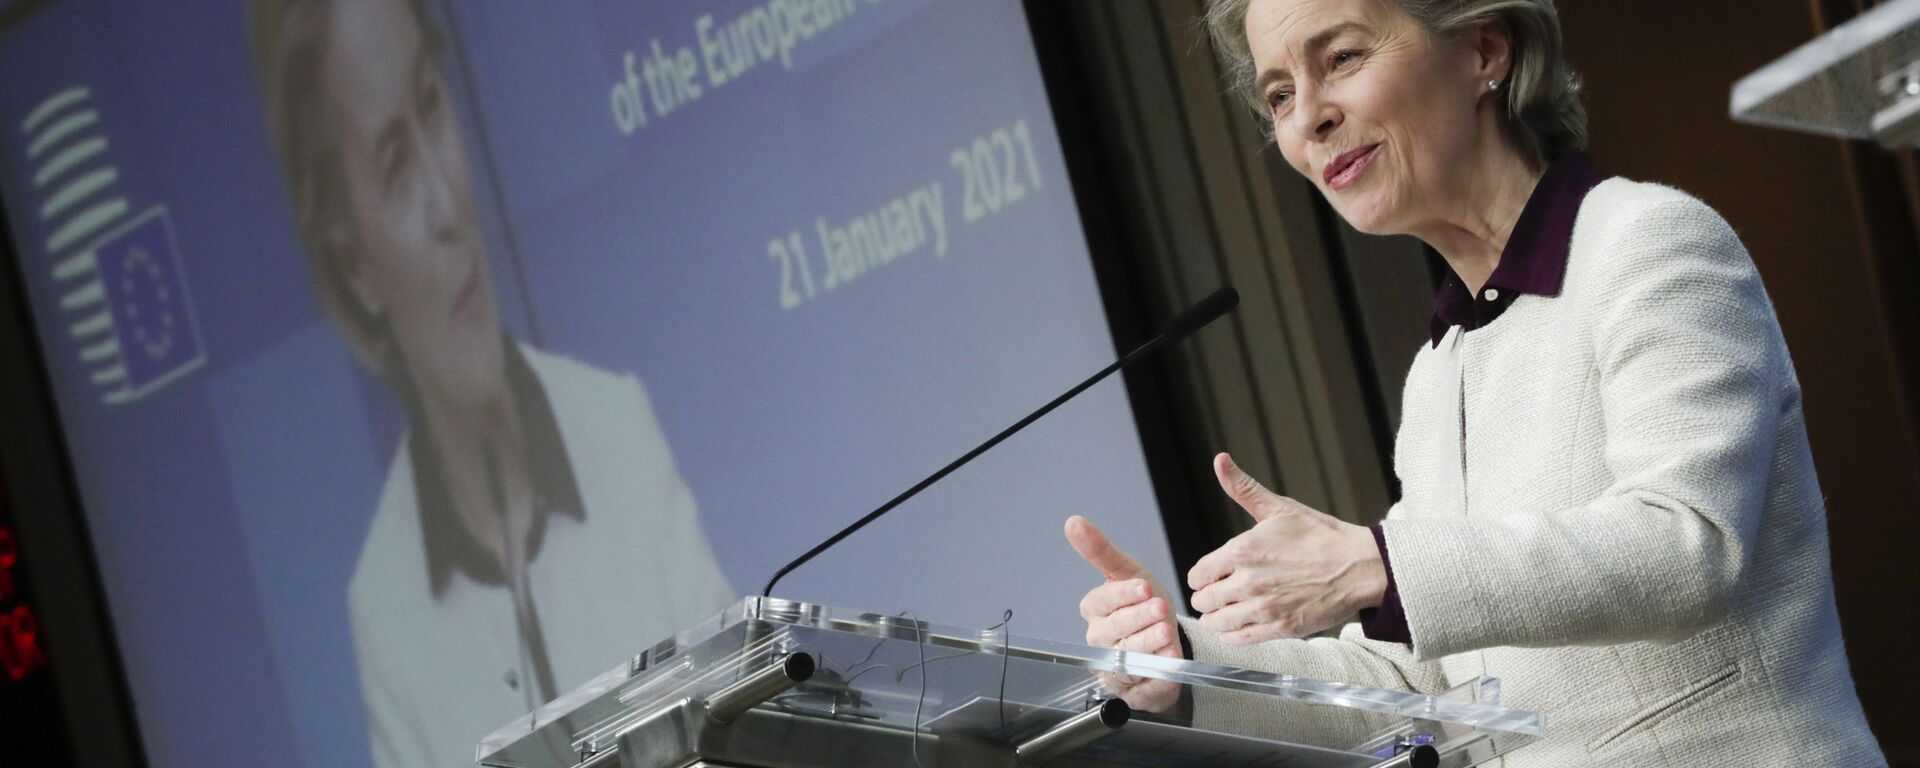 European Commission President Ursula von der Leyen speaks during a joint news conference with European Council President Charles Michel at the end of a EU summit video conference at the European Council headquarters in Brussels, Thursday, Jan. 21, 2021. - Sputnik International, 1920, 04.02.2021